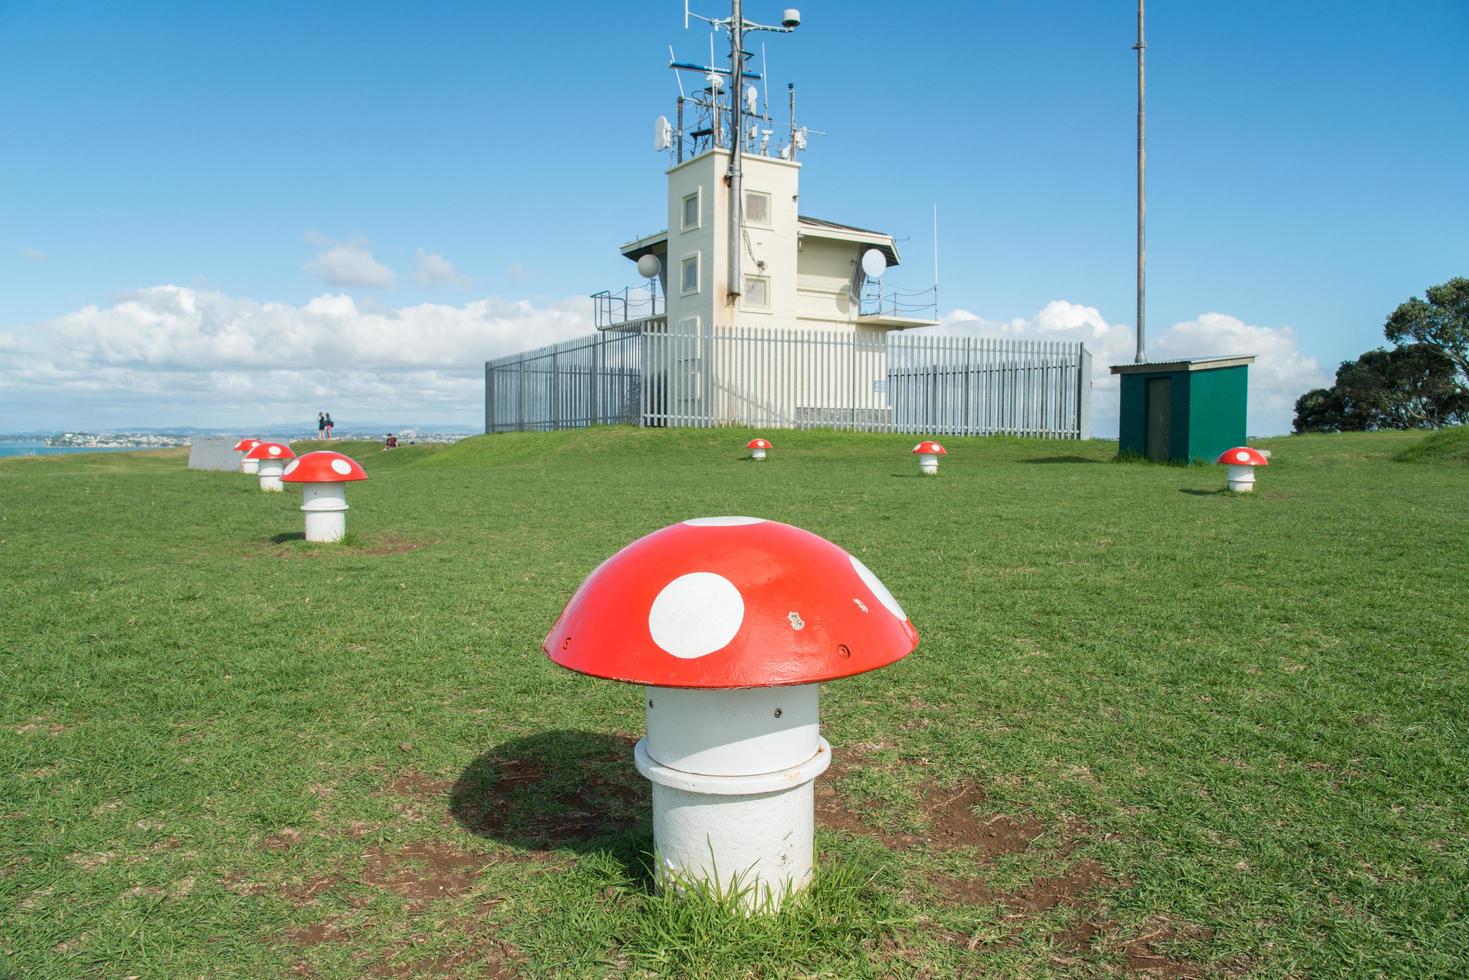 'Mushrooms' on top of Takarunga or Mount Victoria in Devonport, which are in fact vents for a water pumping station, North Island, New Zealand. photo